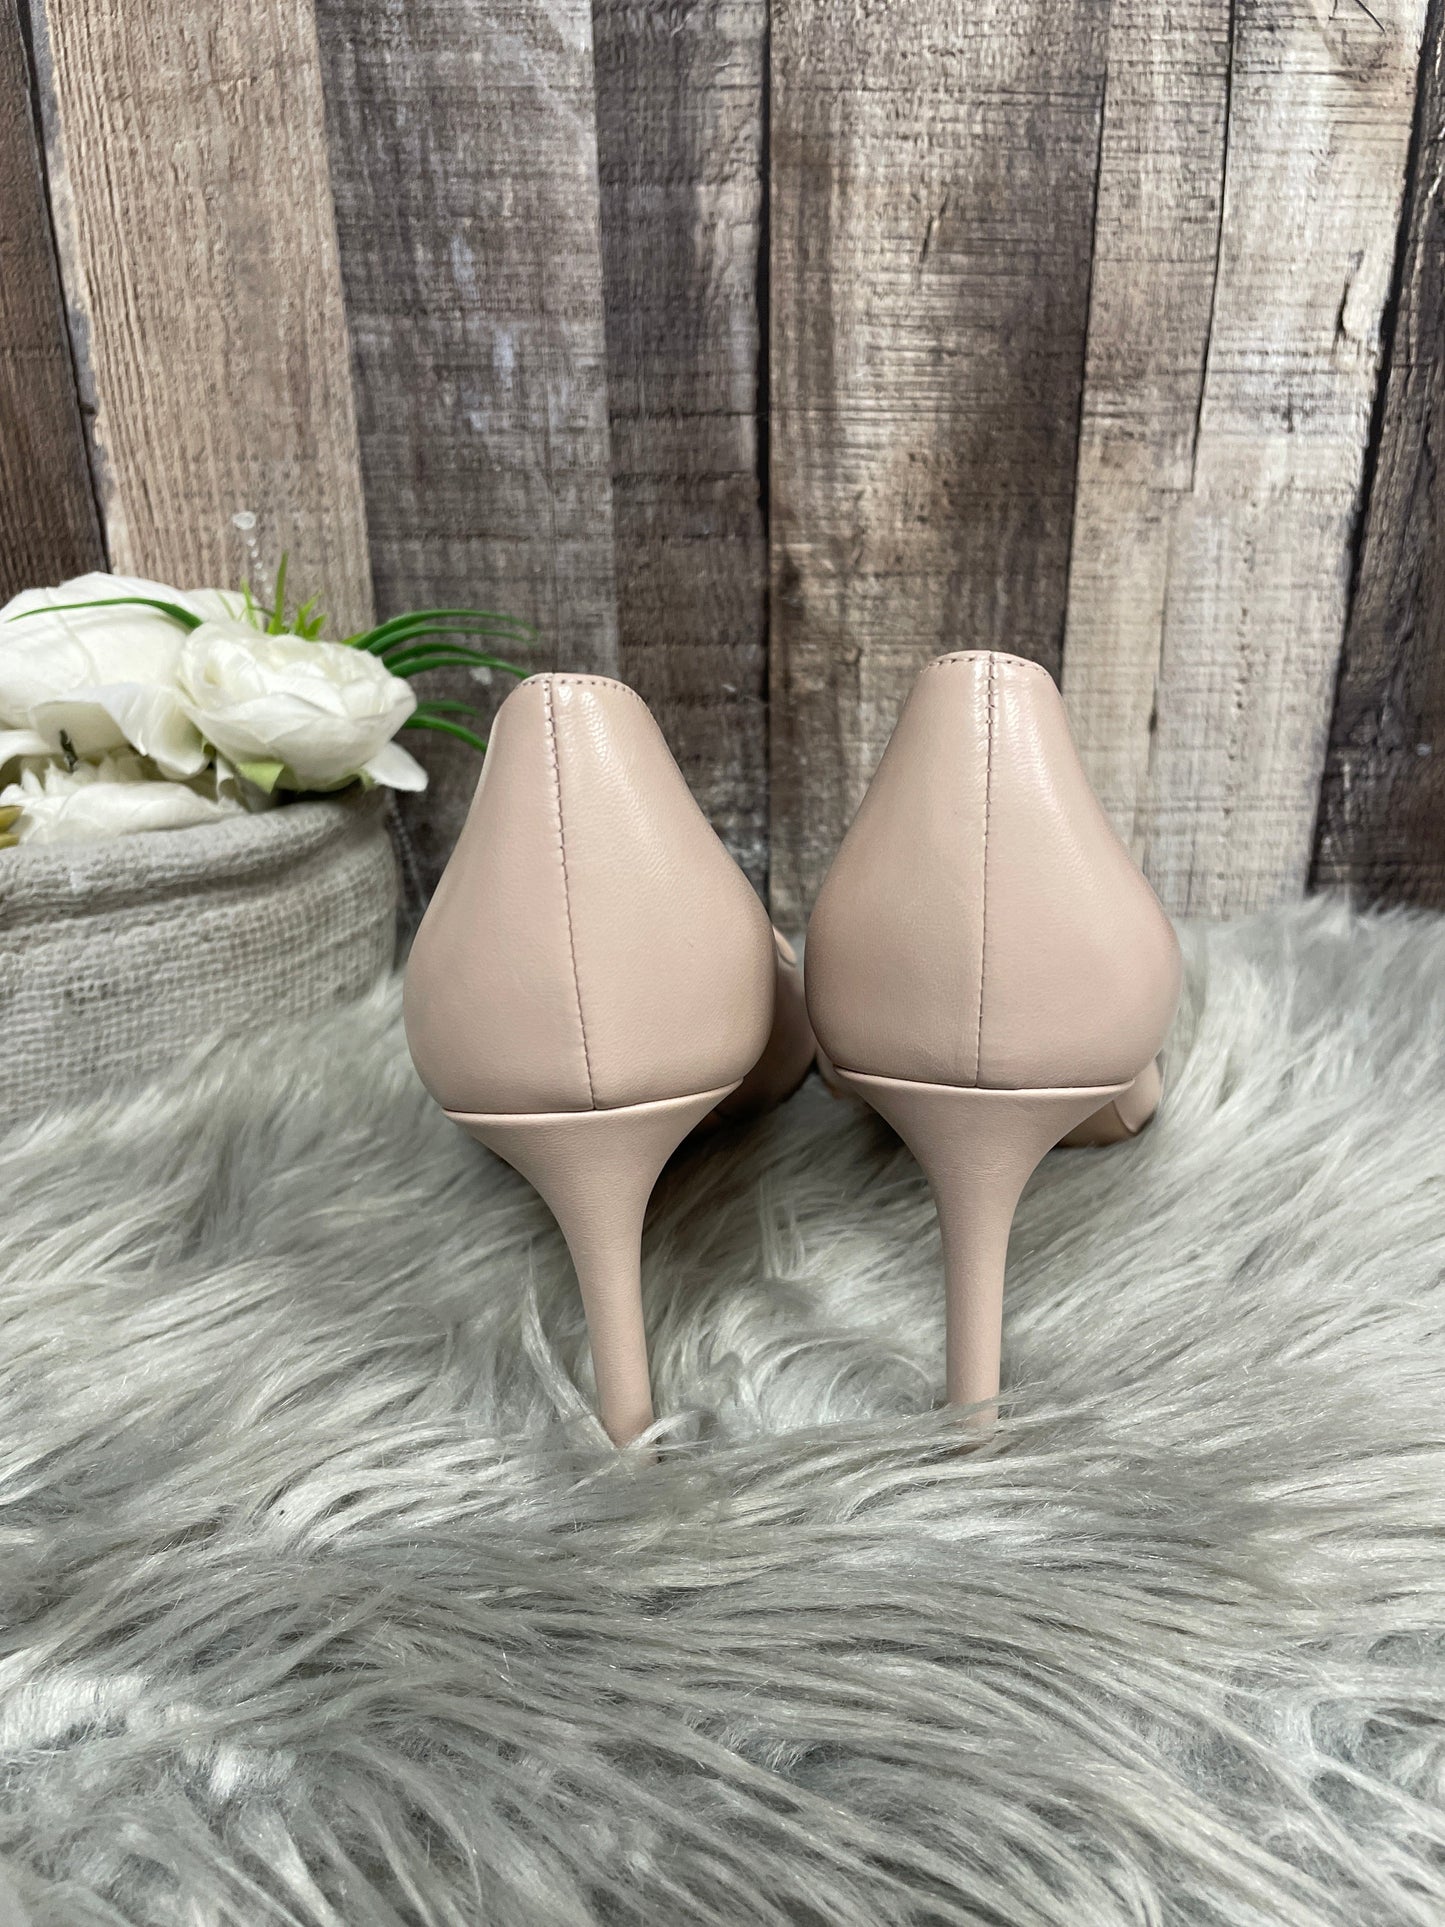 Shoes Heels Stiletto By Cme  Size: 7